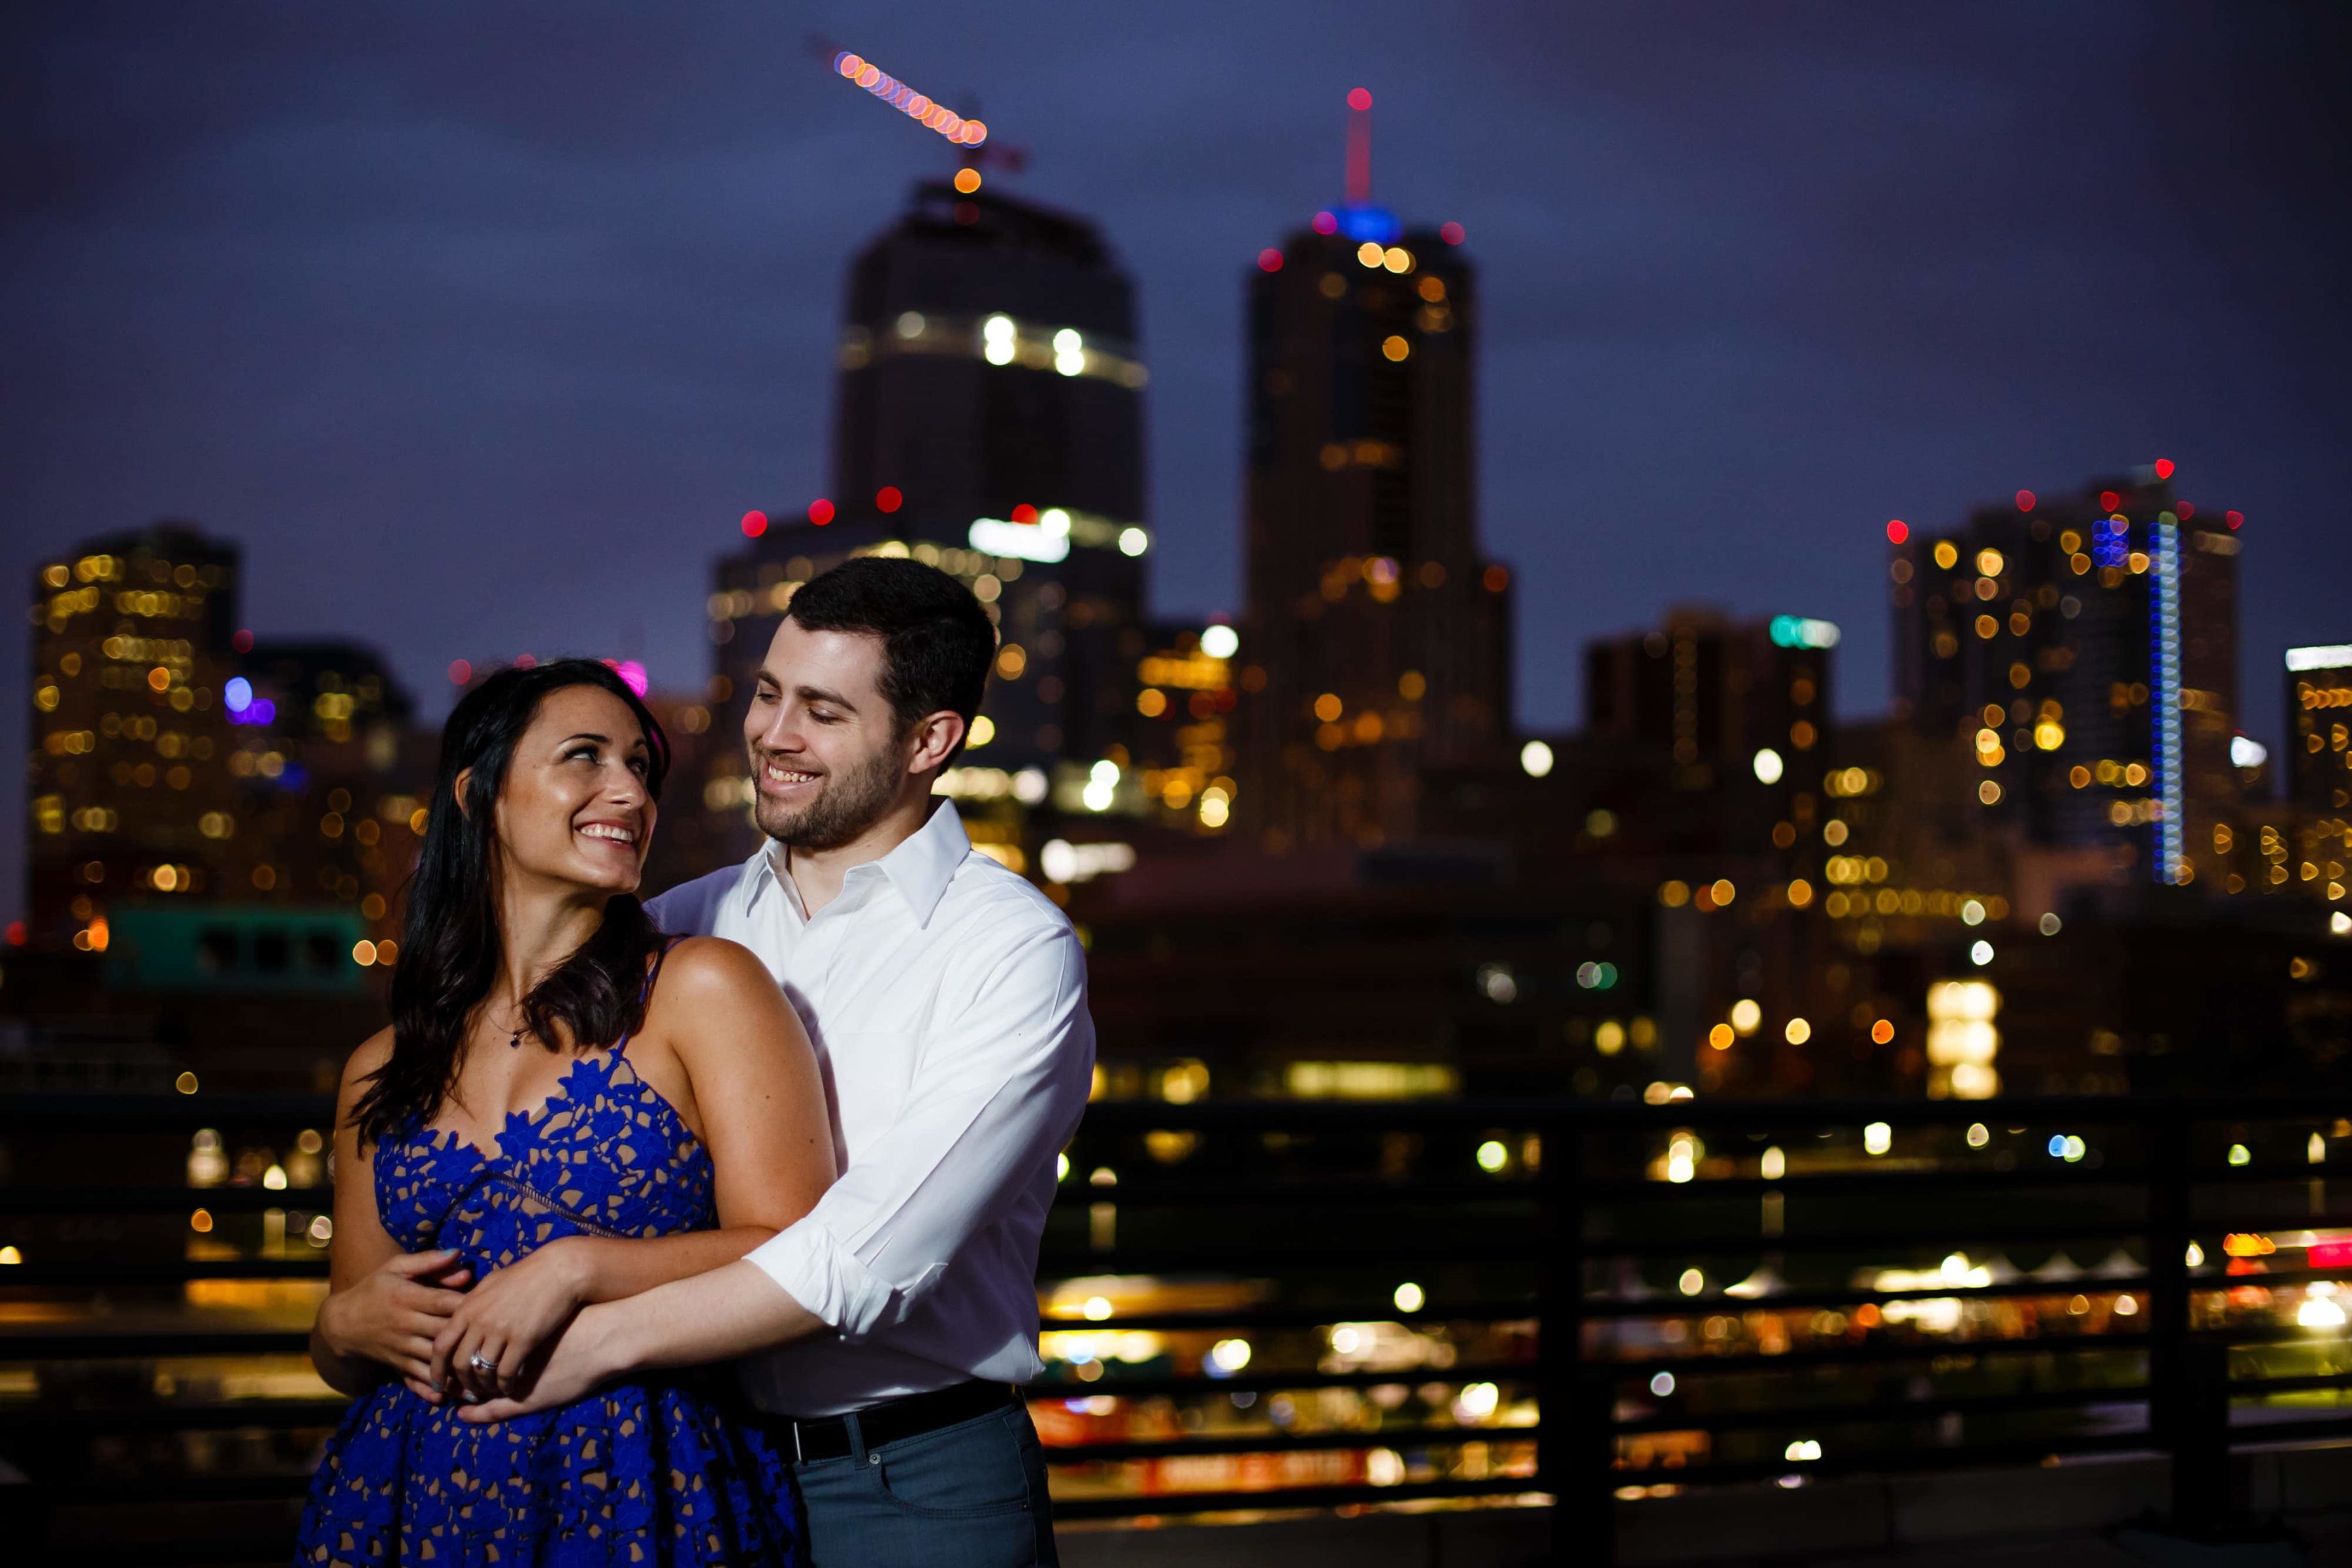 Danielle and Jordan pose together with the Denver skyline in the background during their engagement session